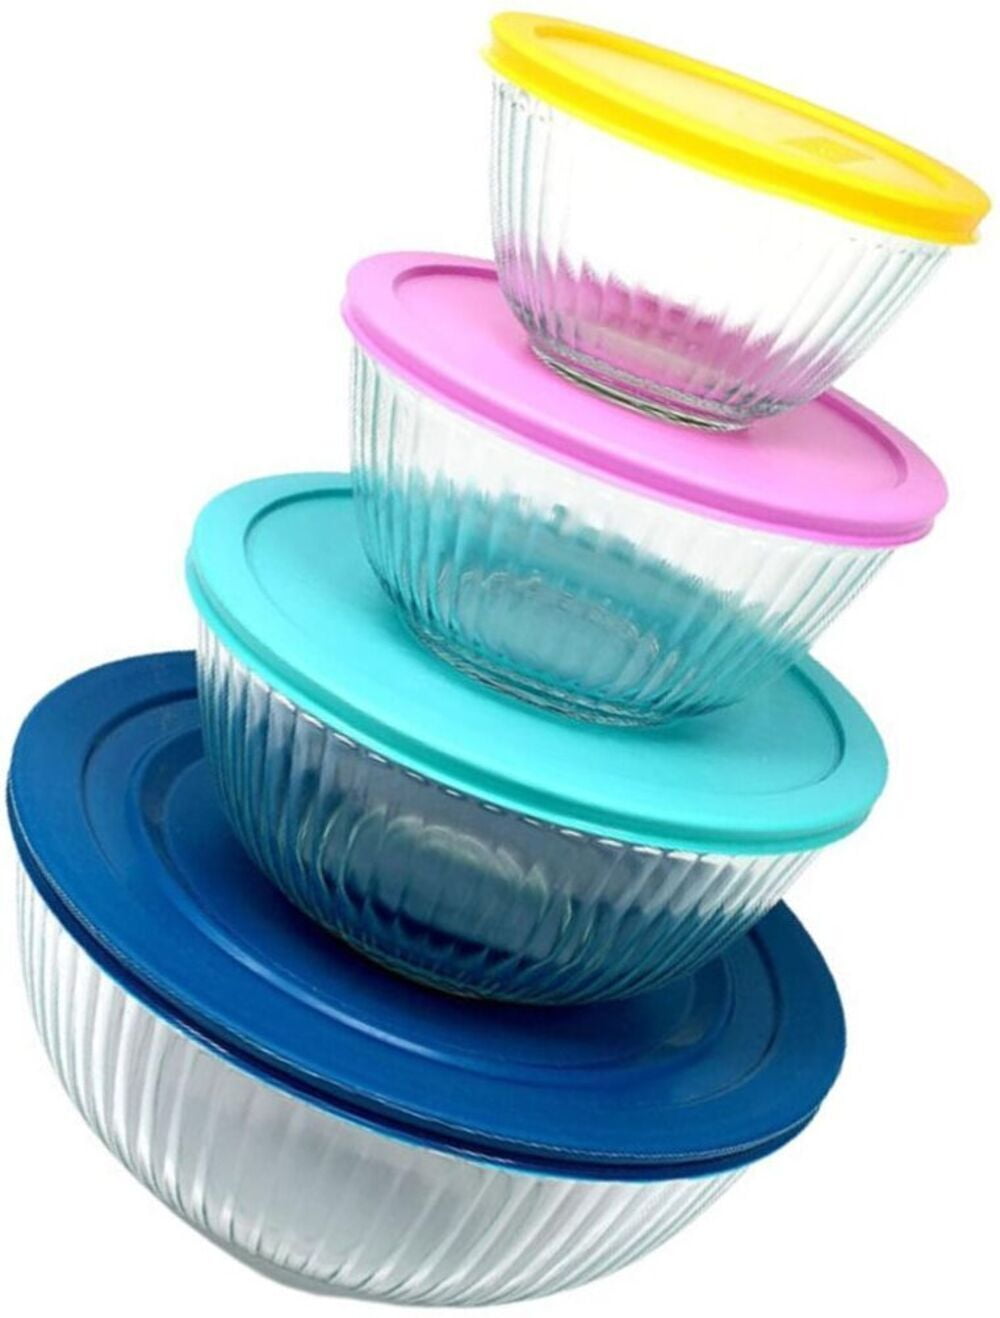 Pyrex 1086053 Mixing Bowl Set with Colored Lids, 8 Piece – Toolbox Supply